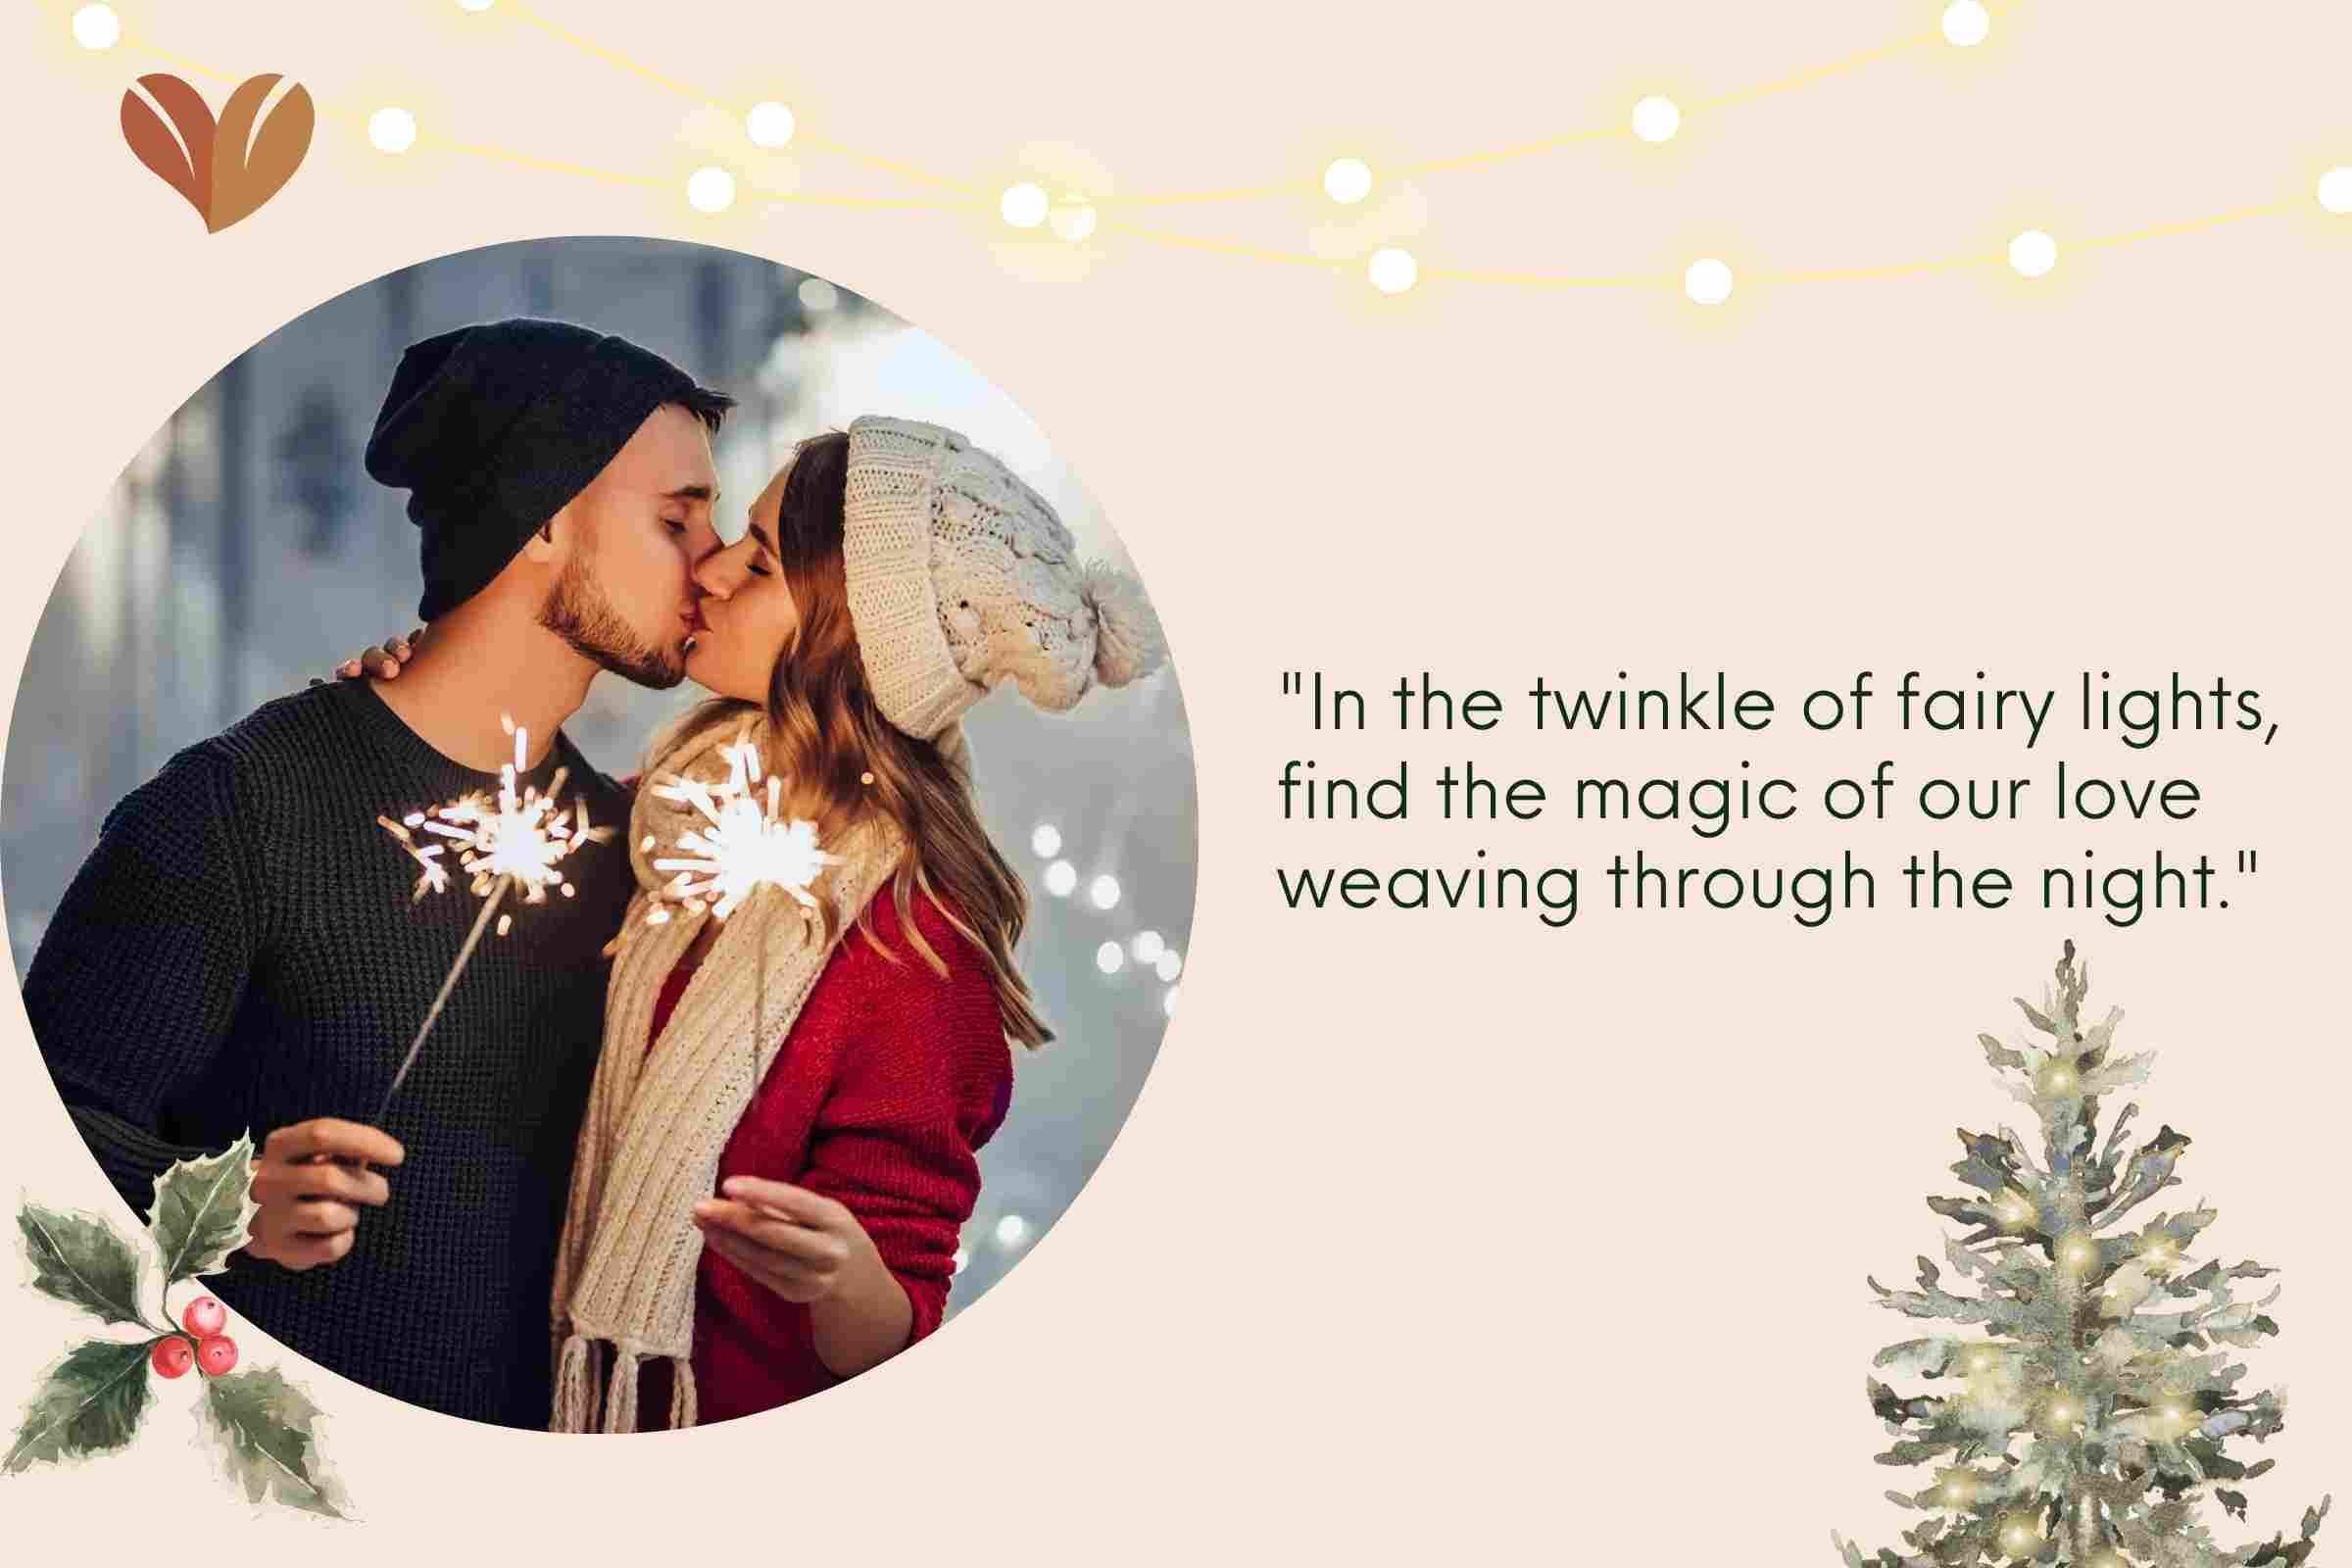 Christmas quotes for Fiance: "In the twinkle of fairy lights, find the magic of our love weaving through the night."